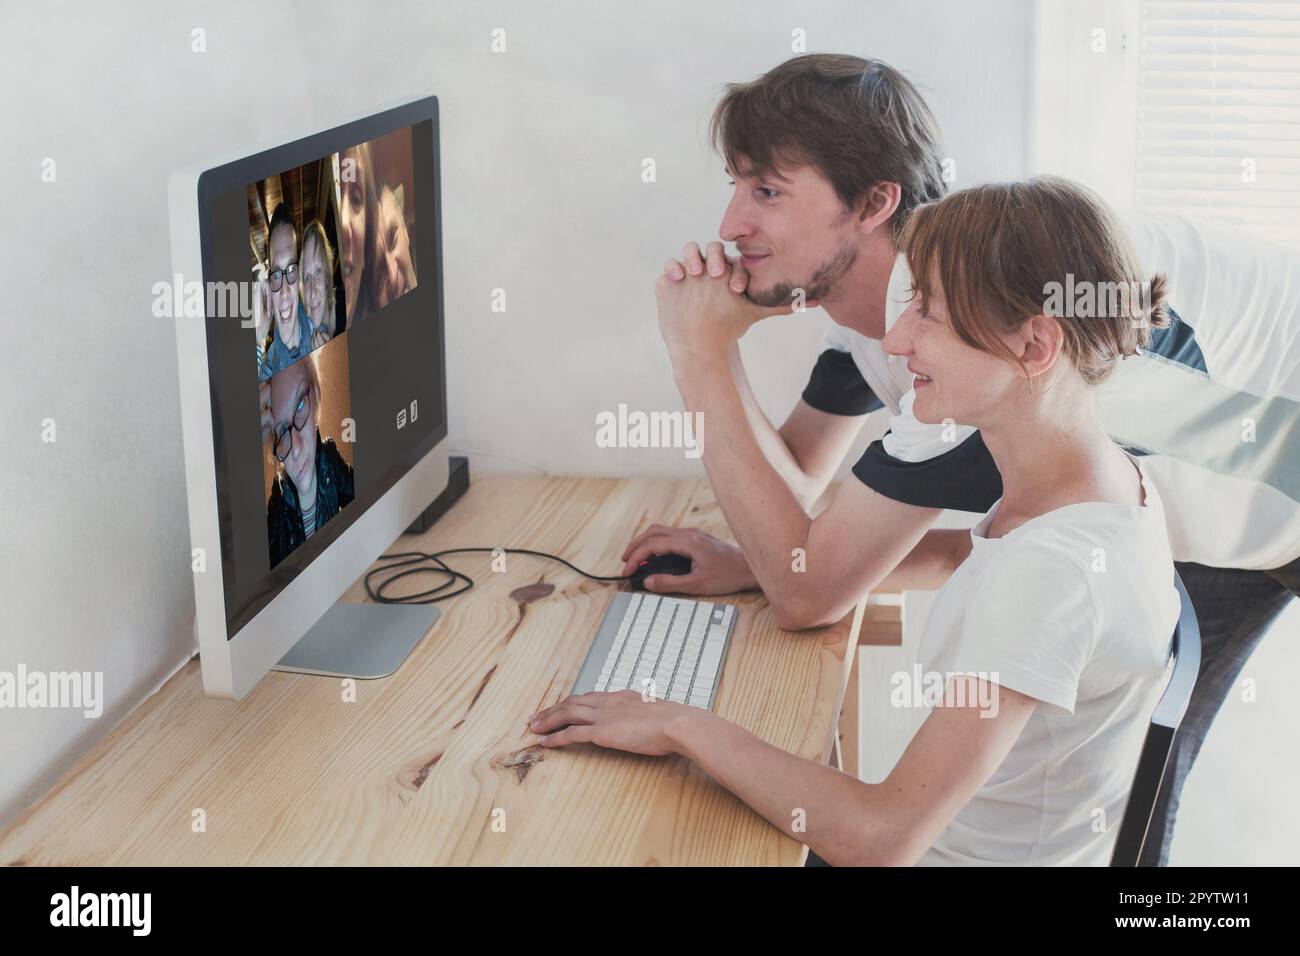 family video chat, adult children talking to parents during pandemic coronavirus lockdown from home Stock Photo